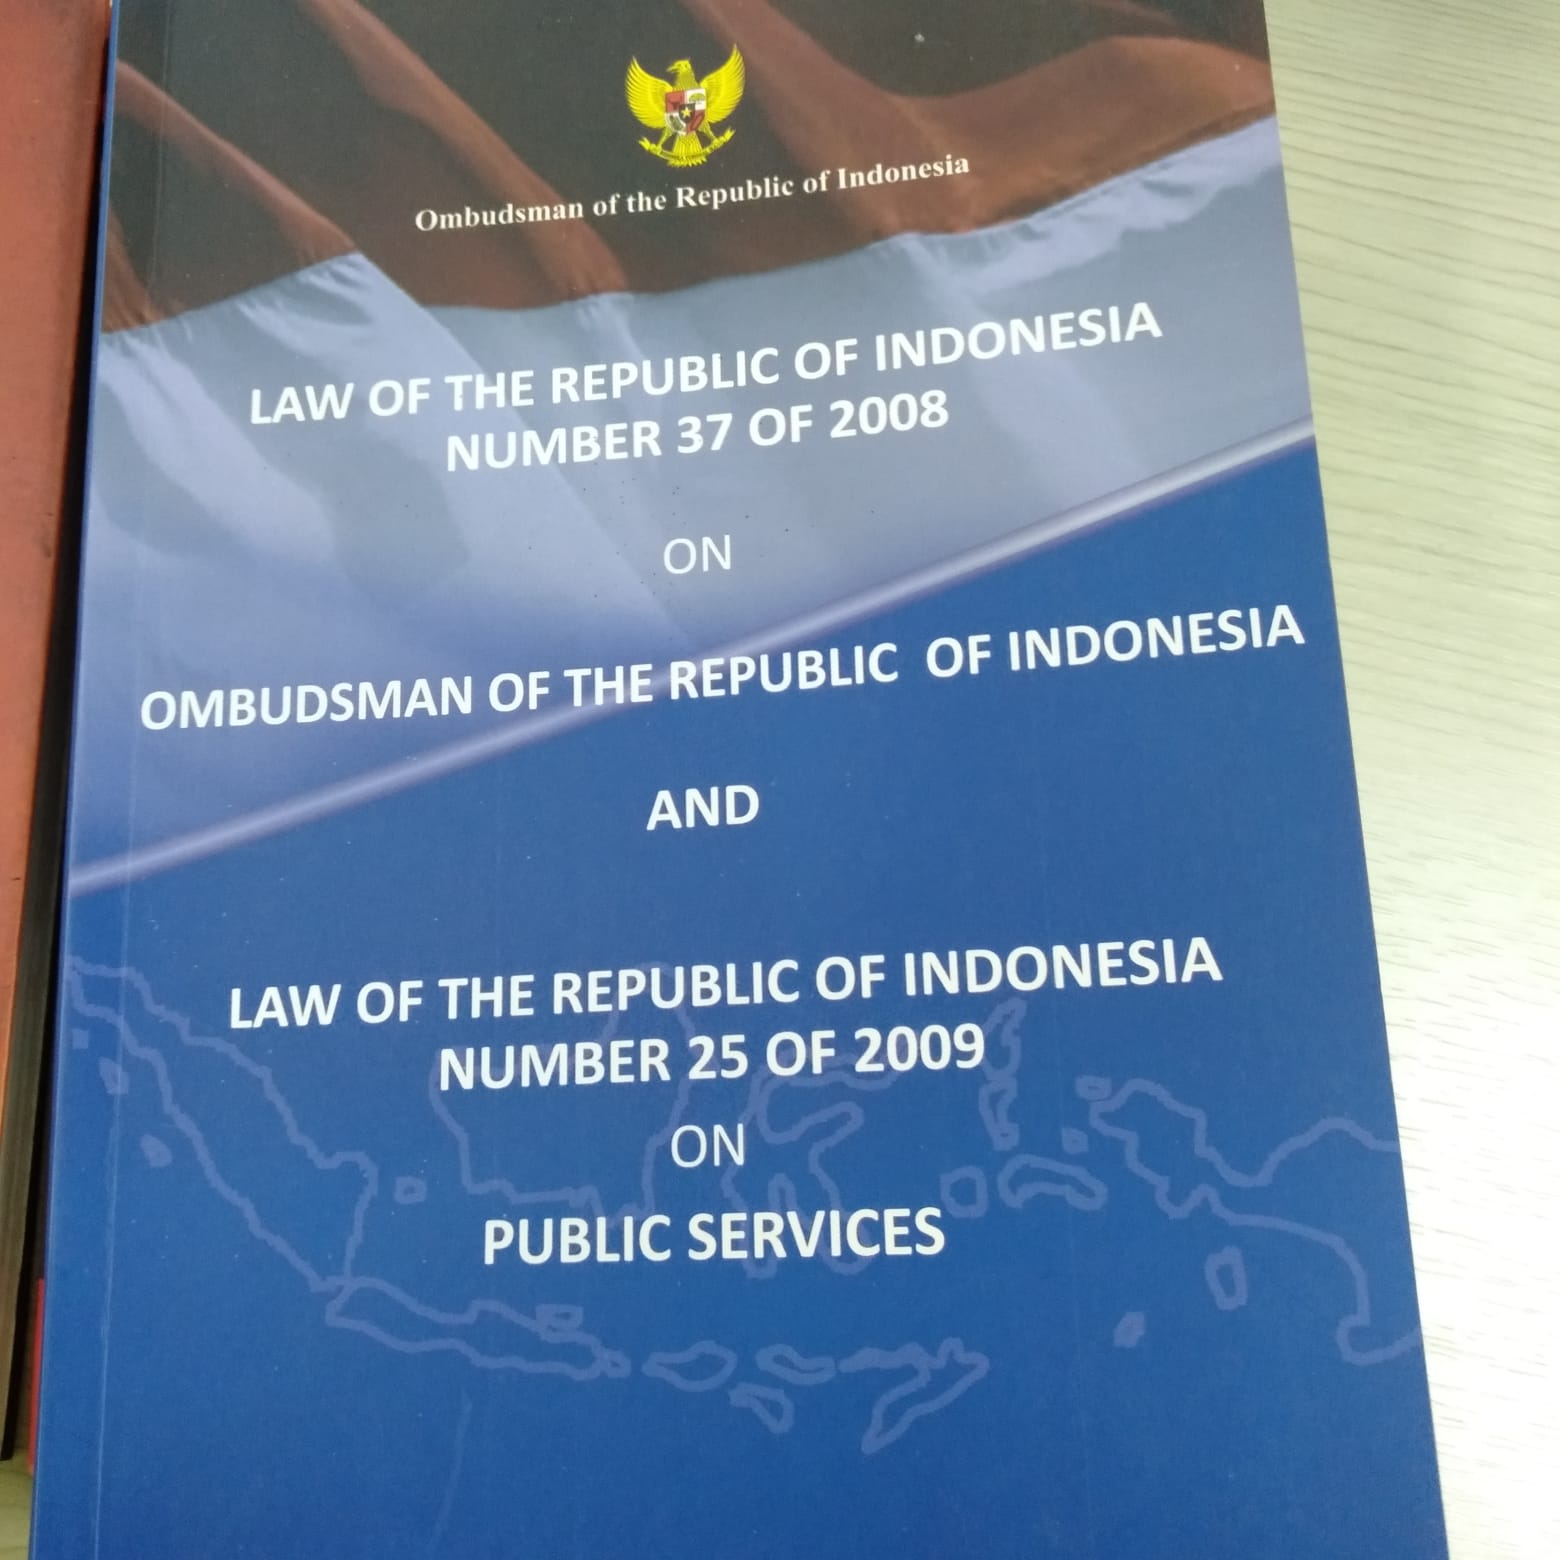 Law of the Republic of Indonesia Number 37 of 2008 on Ombudsman of the Republic of Indonesia and Law of the Republic of Indonesia Number 25 of 2009 on Public Services on